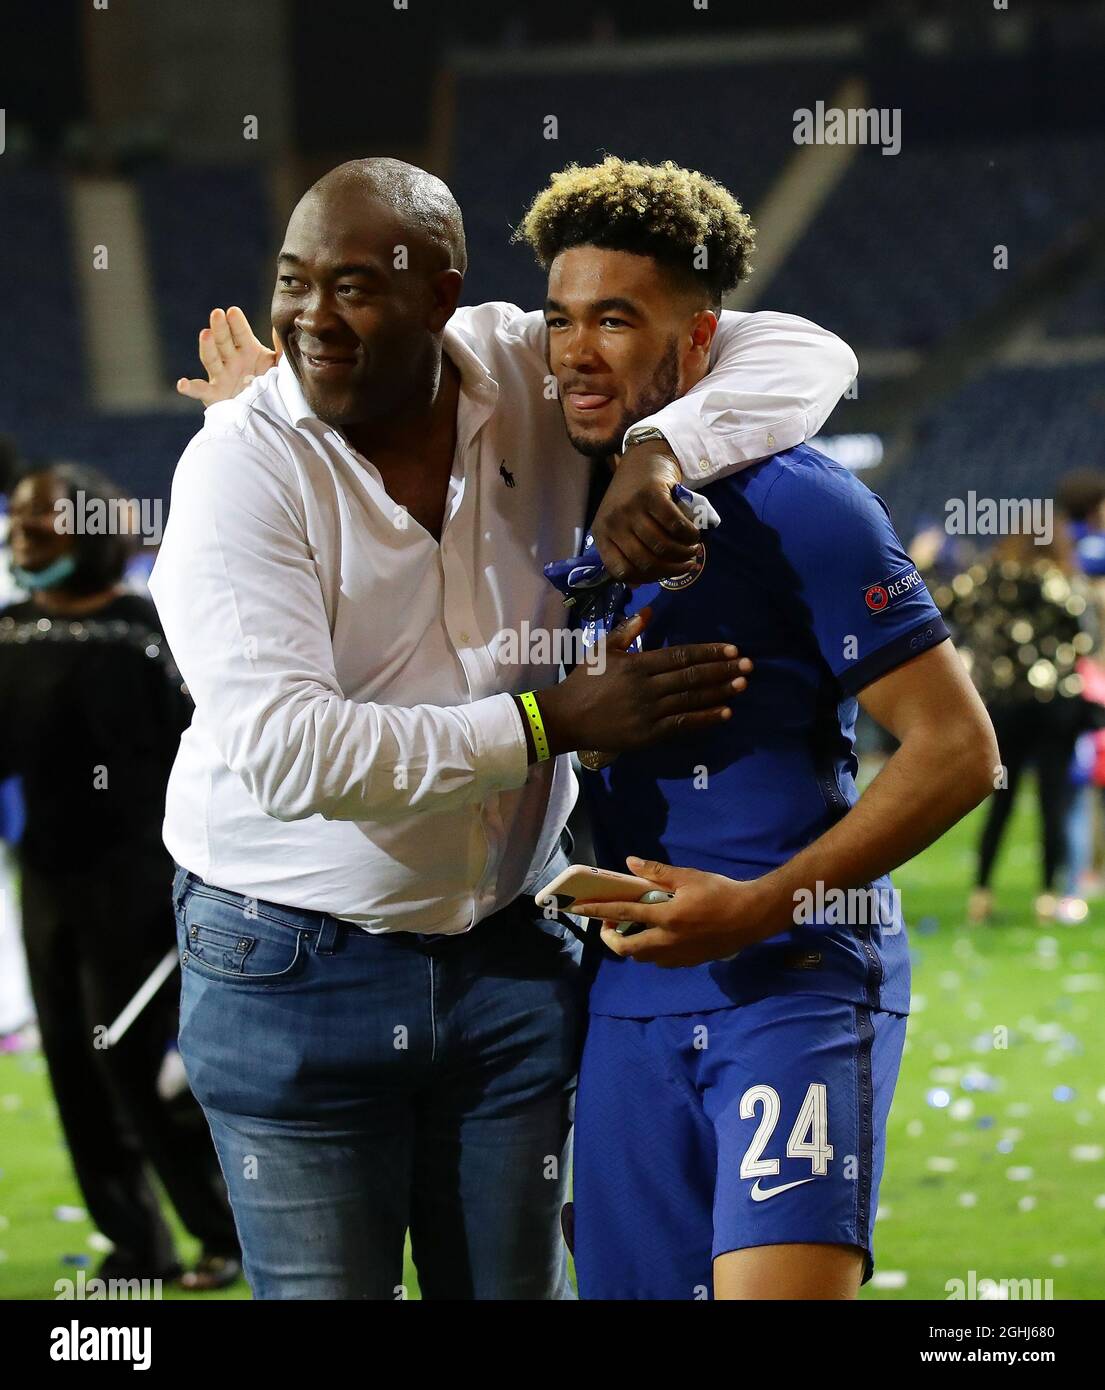 Porto, Portugal, 29th May 2021. Reece James of Chelsea with his dad during the UEFA Champions League match at the Estadio do Dragao, Porto. Picture credit should read: David Klein / Sportimage via PA Images Stock Photo